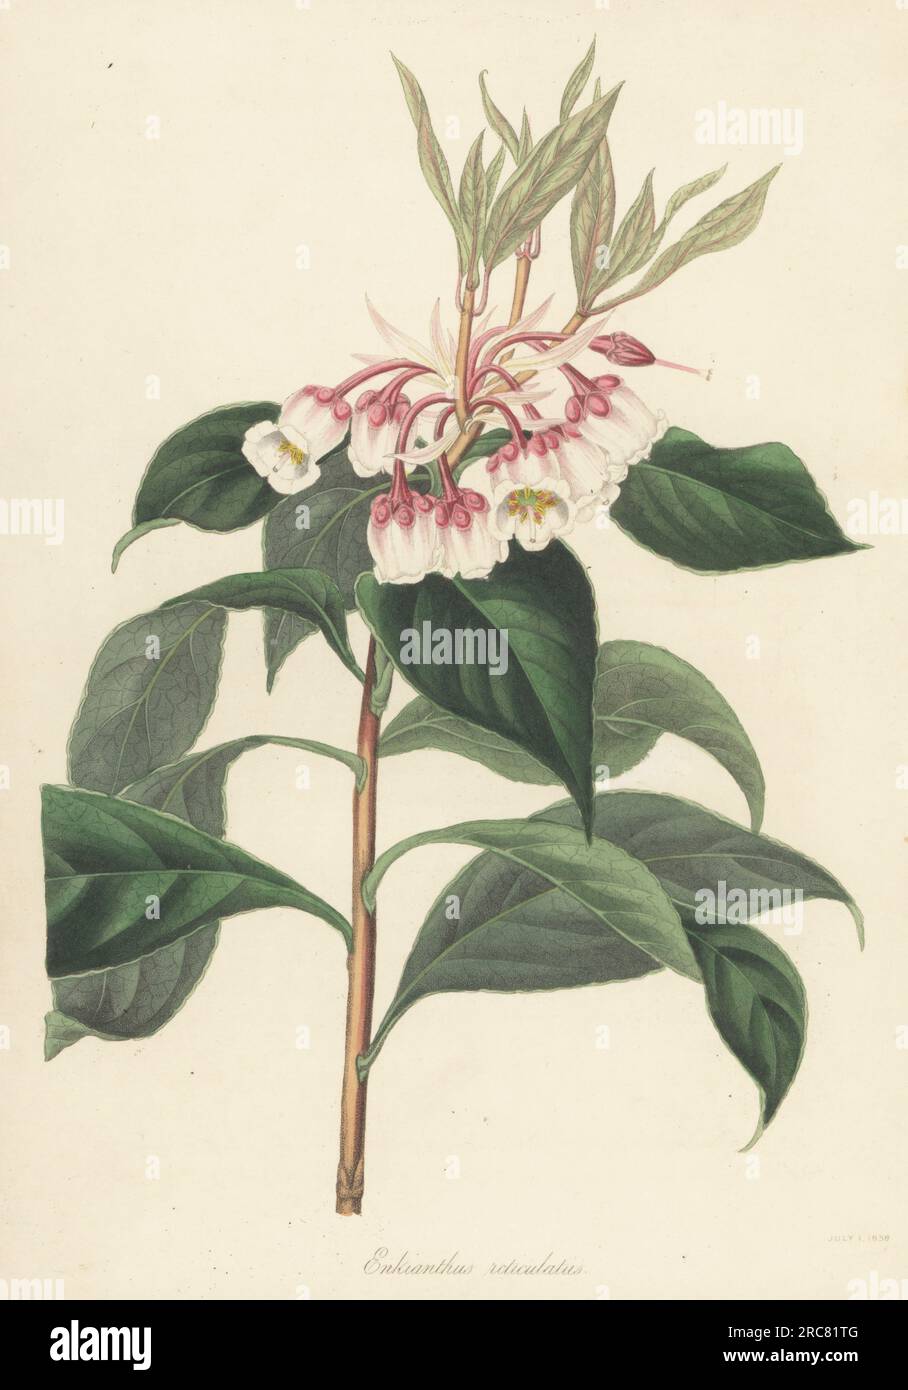 Enkianthus quinqueflorus. Native to Asia, China, and raised at Lucombe, Pince & Co. Nursery, Exeter. Netted-leaved enkianthus, Enkianthus reticulatus. Handcoloured lithograph after a botanical illustration by Miss Flood from Joseph Paxton’s Magazine of Botany, and Register of Flowering Plants, Volume 5, Orr and Smith, London, 1838. Stock Photo